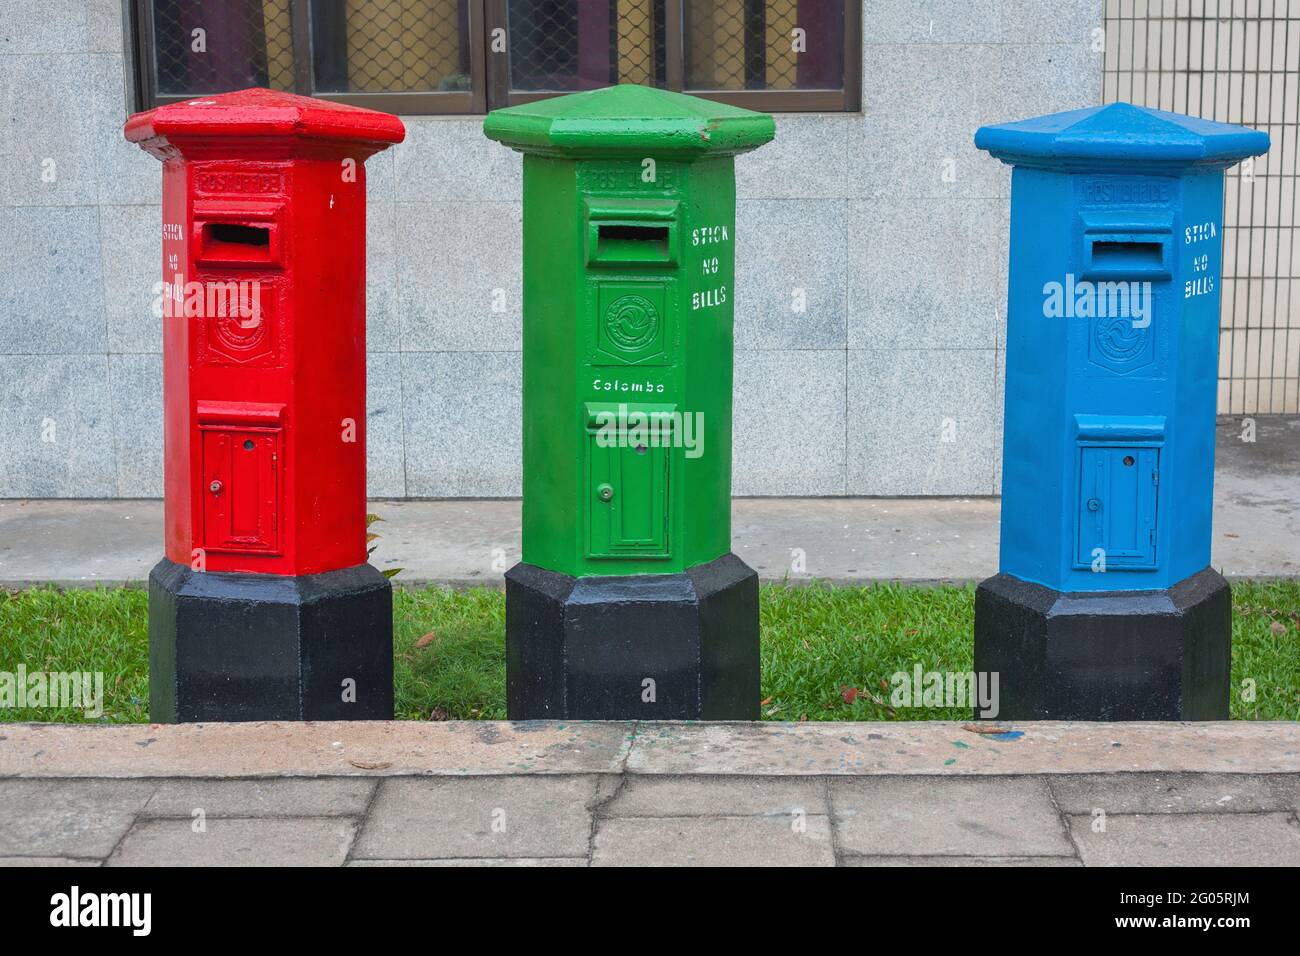 Three Royal Mail collection post boxes coloured red, green and blue on sidewalk in Colombo, Sri Lanka Stock Photo